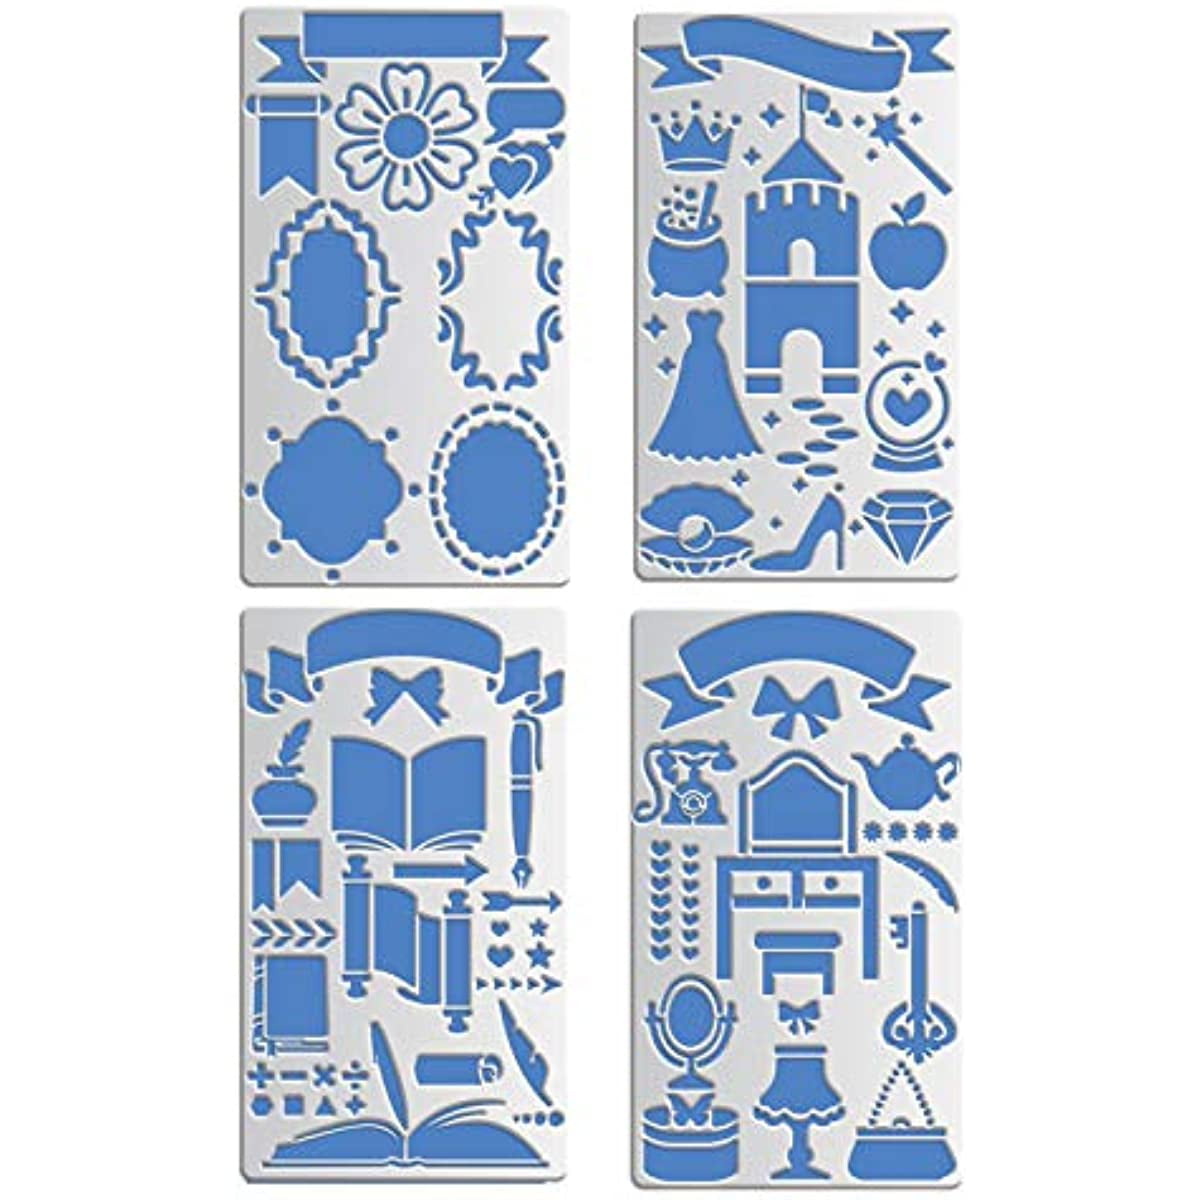 4 PCS Mixed Hollowing Metal Stencils Journal Stencil Template for Wood  carving Drawings and Woodburning Engraving and Scrapbooking Project